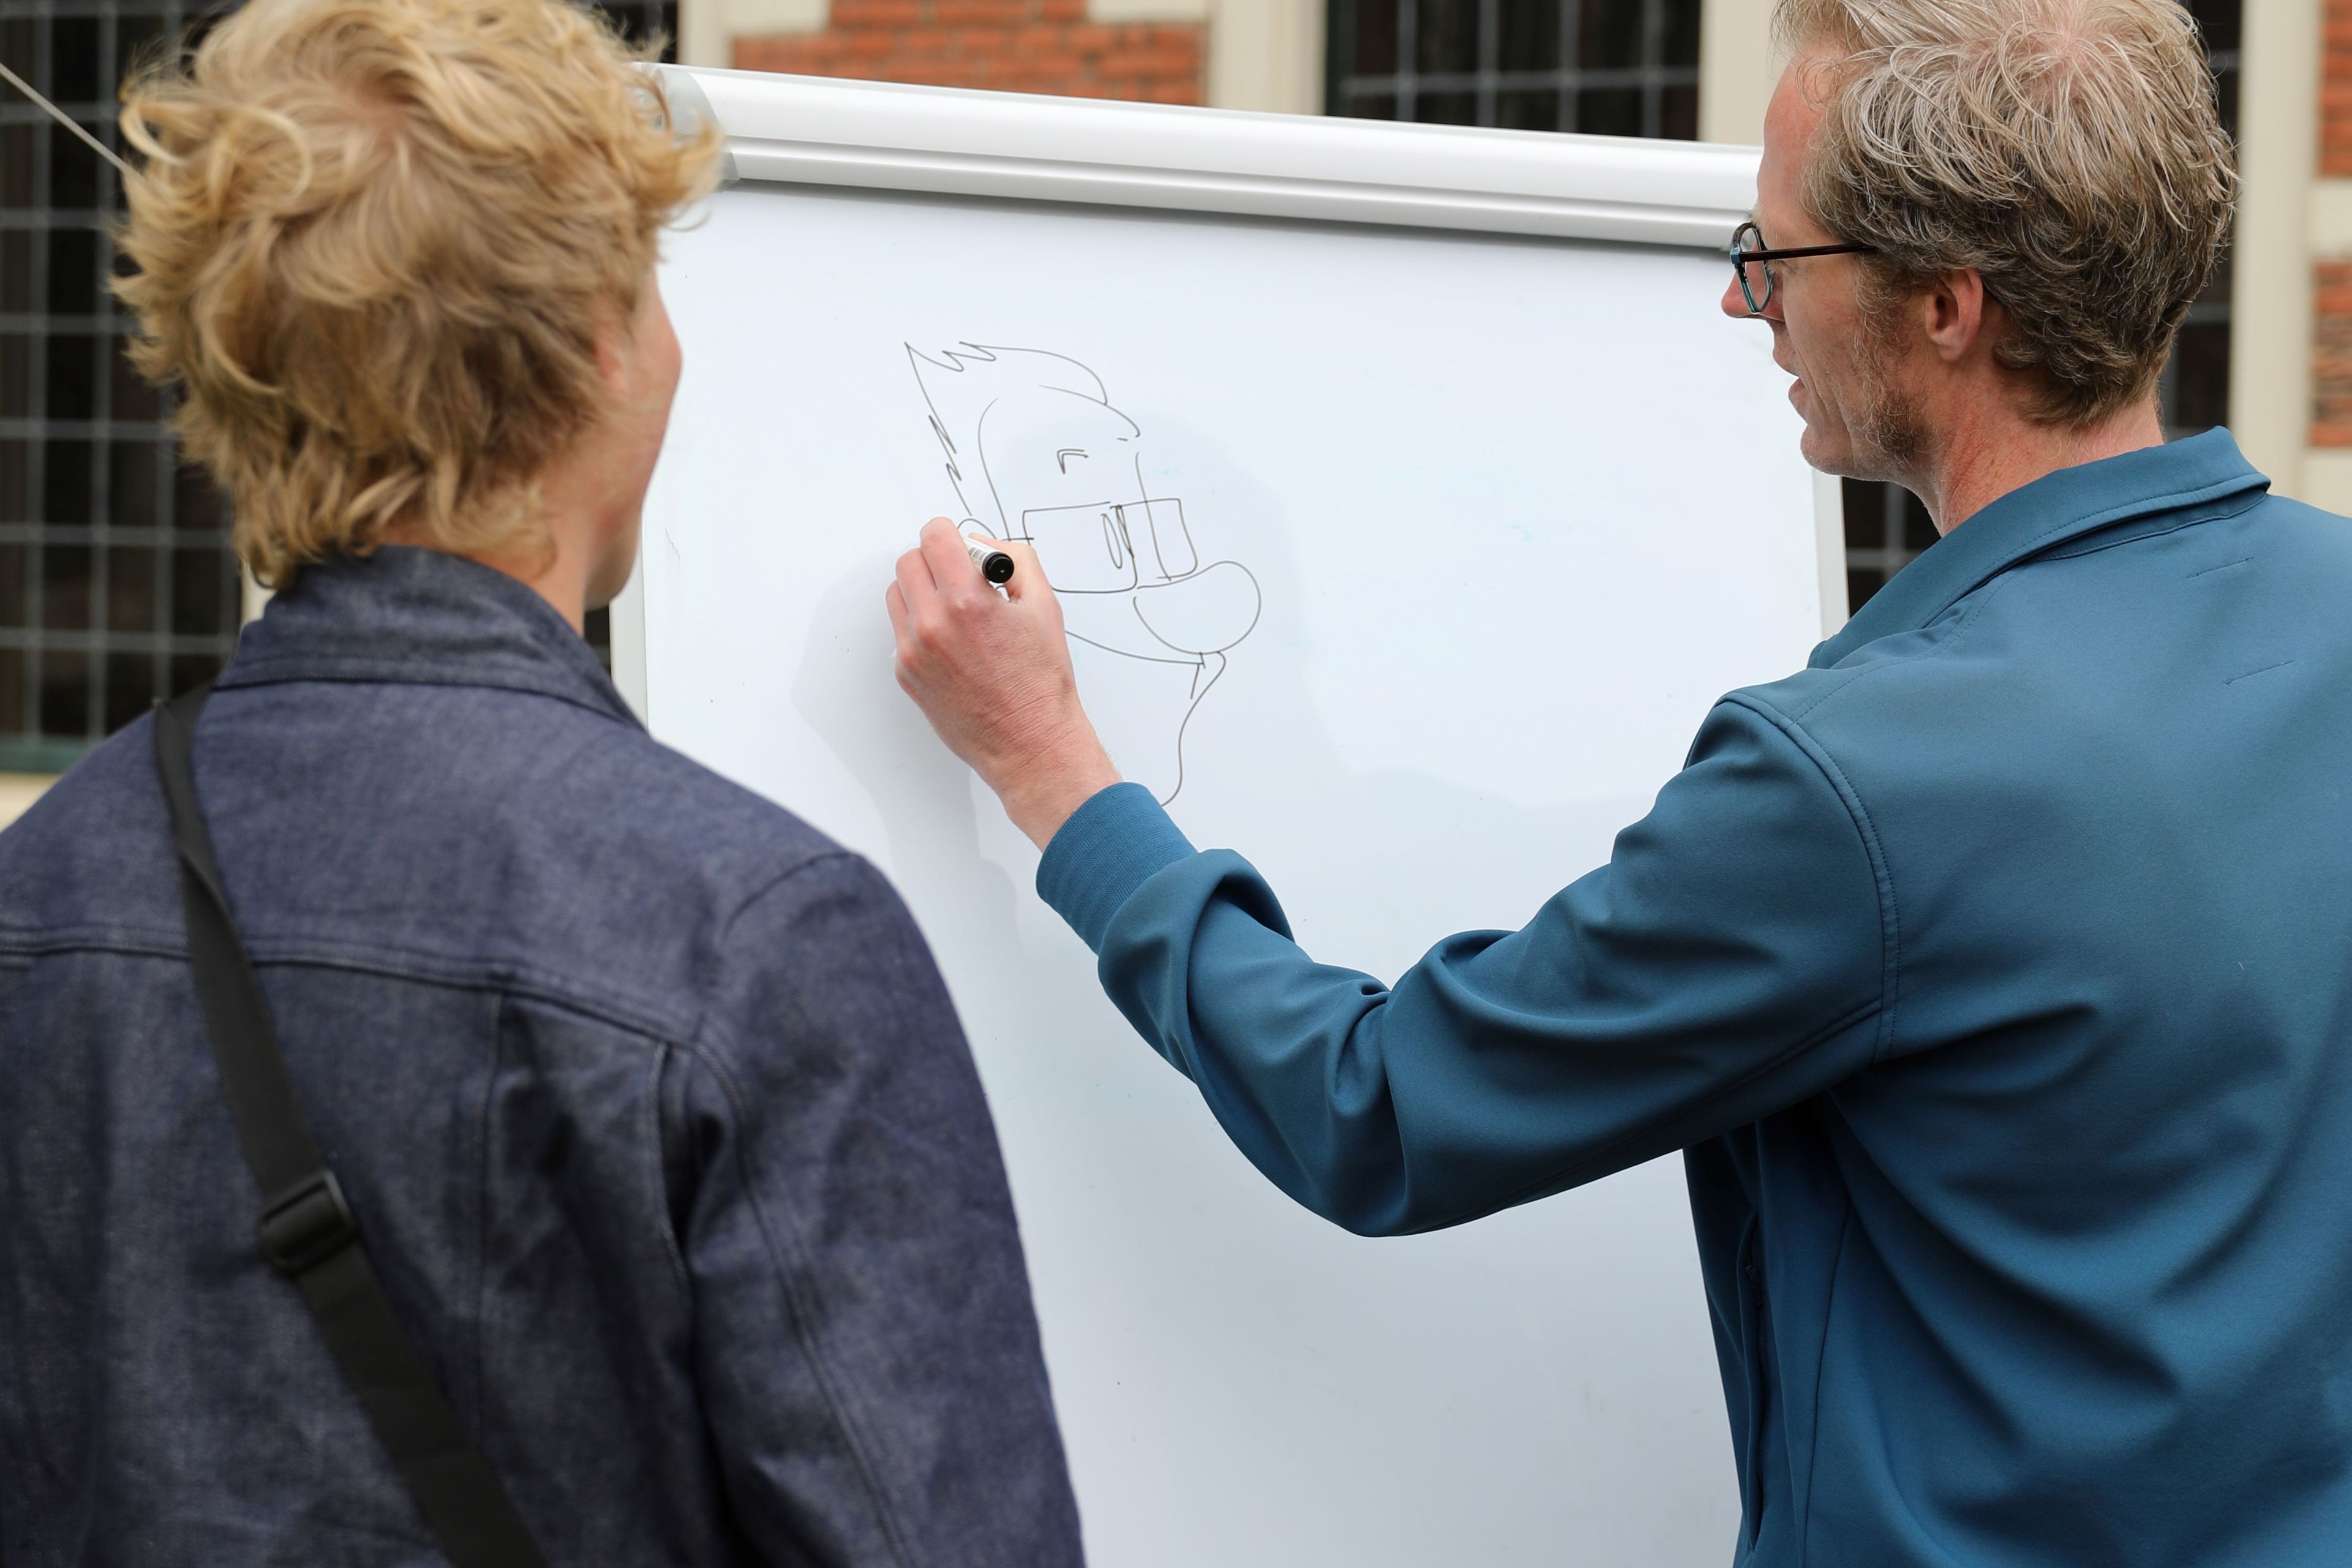 Cartooning during outside the box festival.